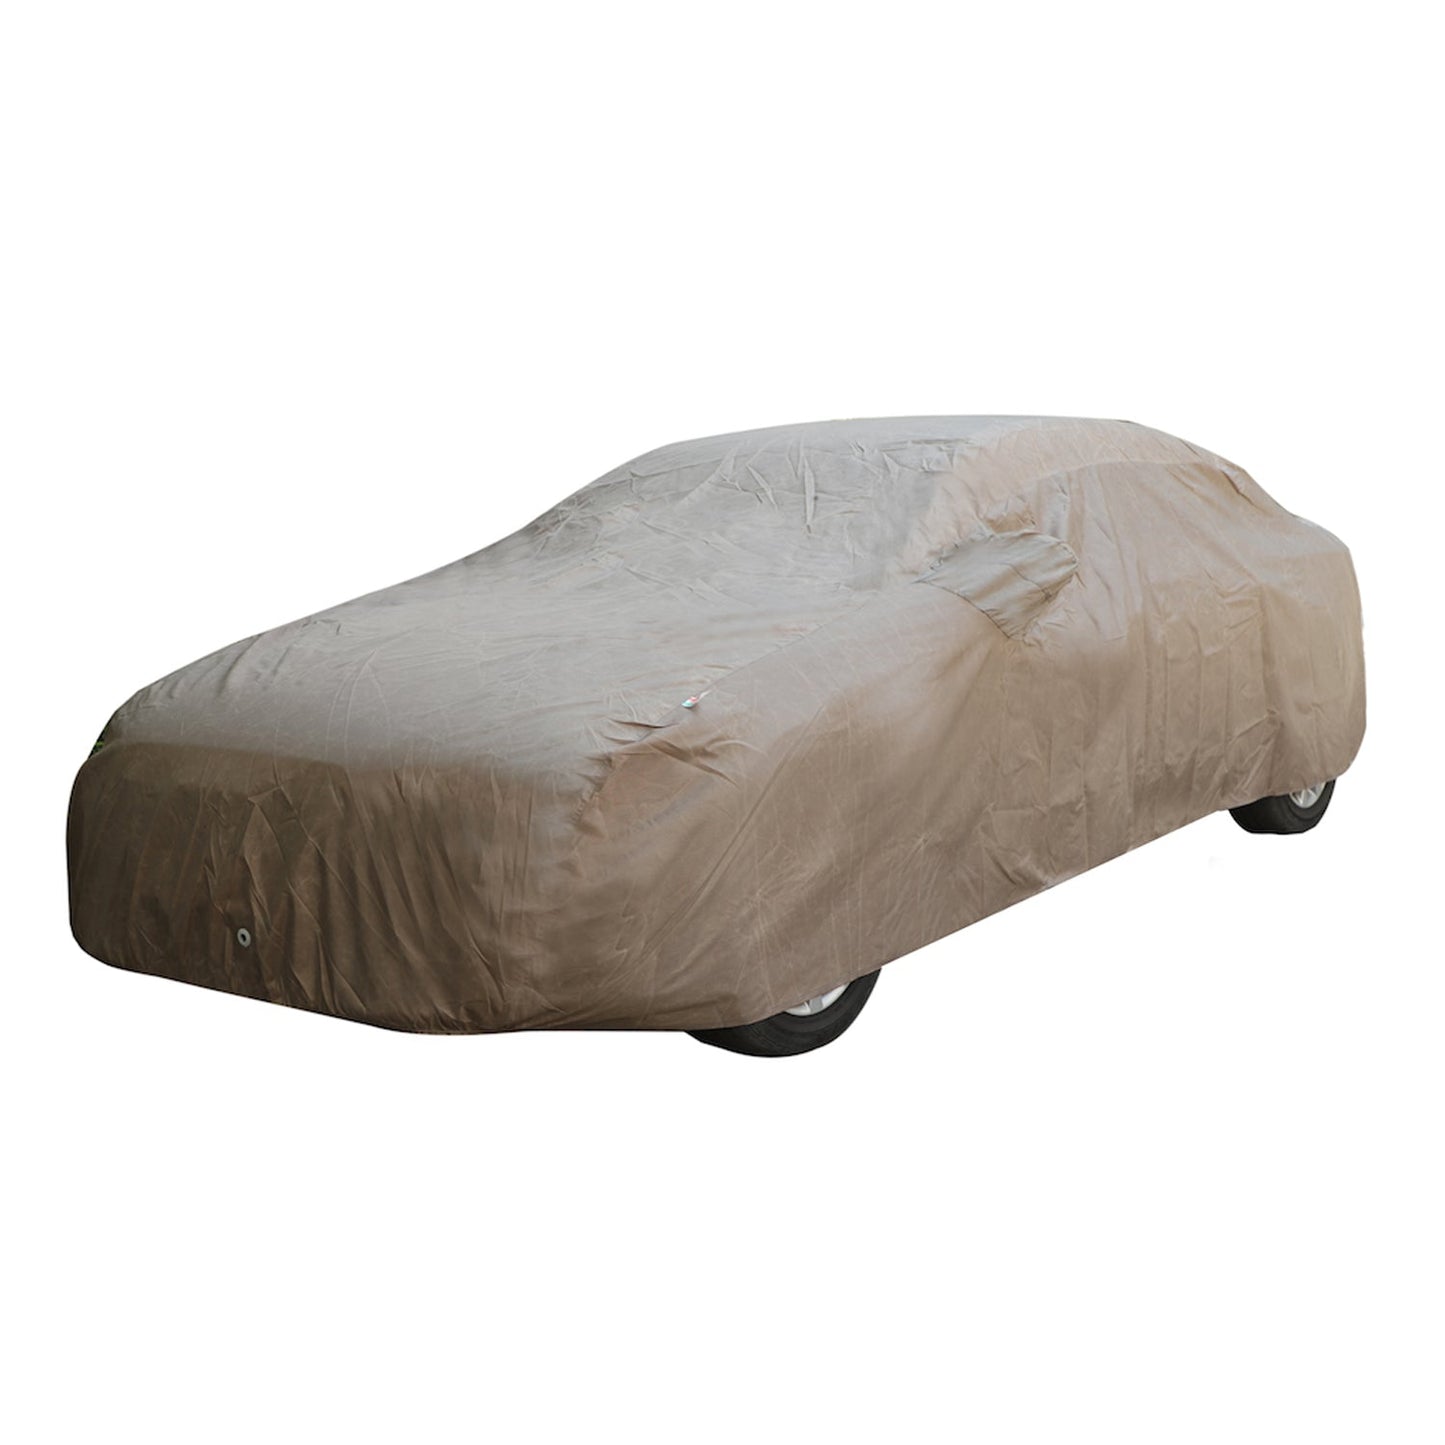 Oshotto Brown 100% Waterproof Car Body Cover with Mirror Pockets For Toyota Etios